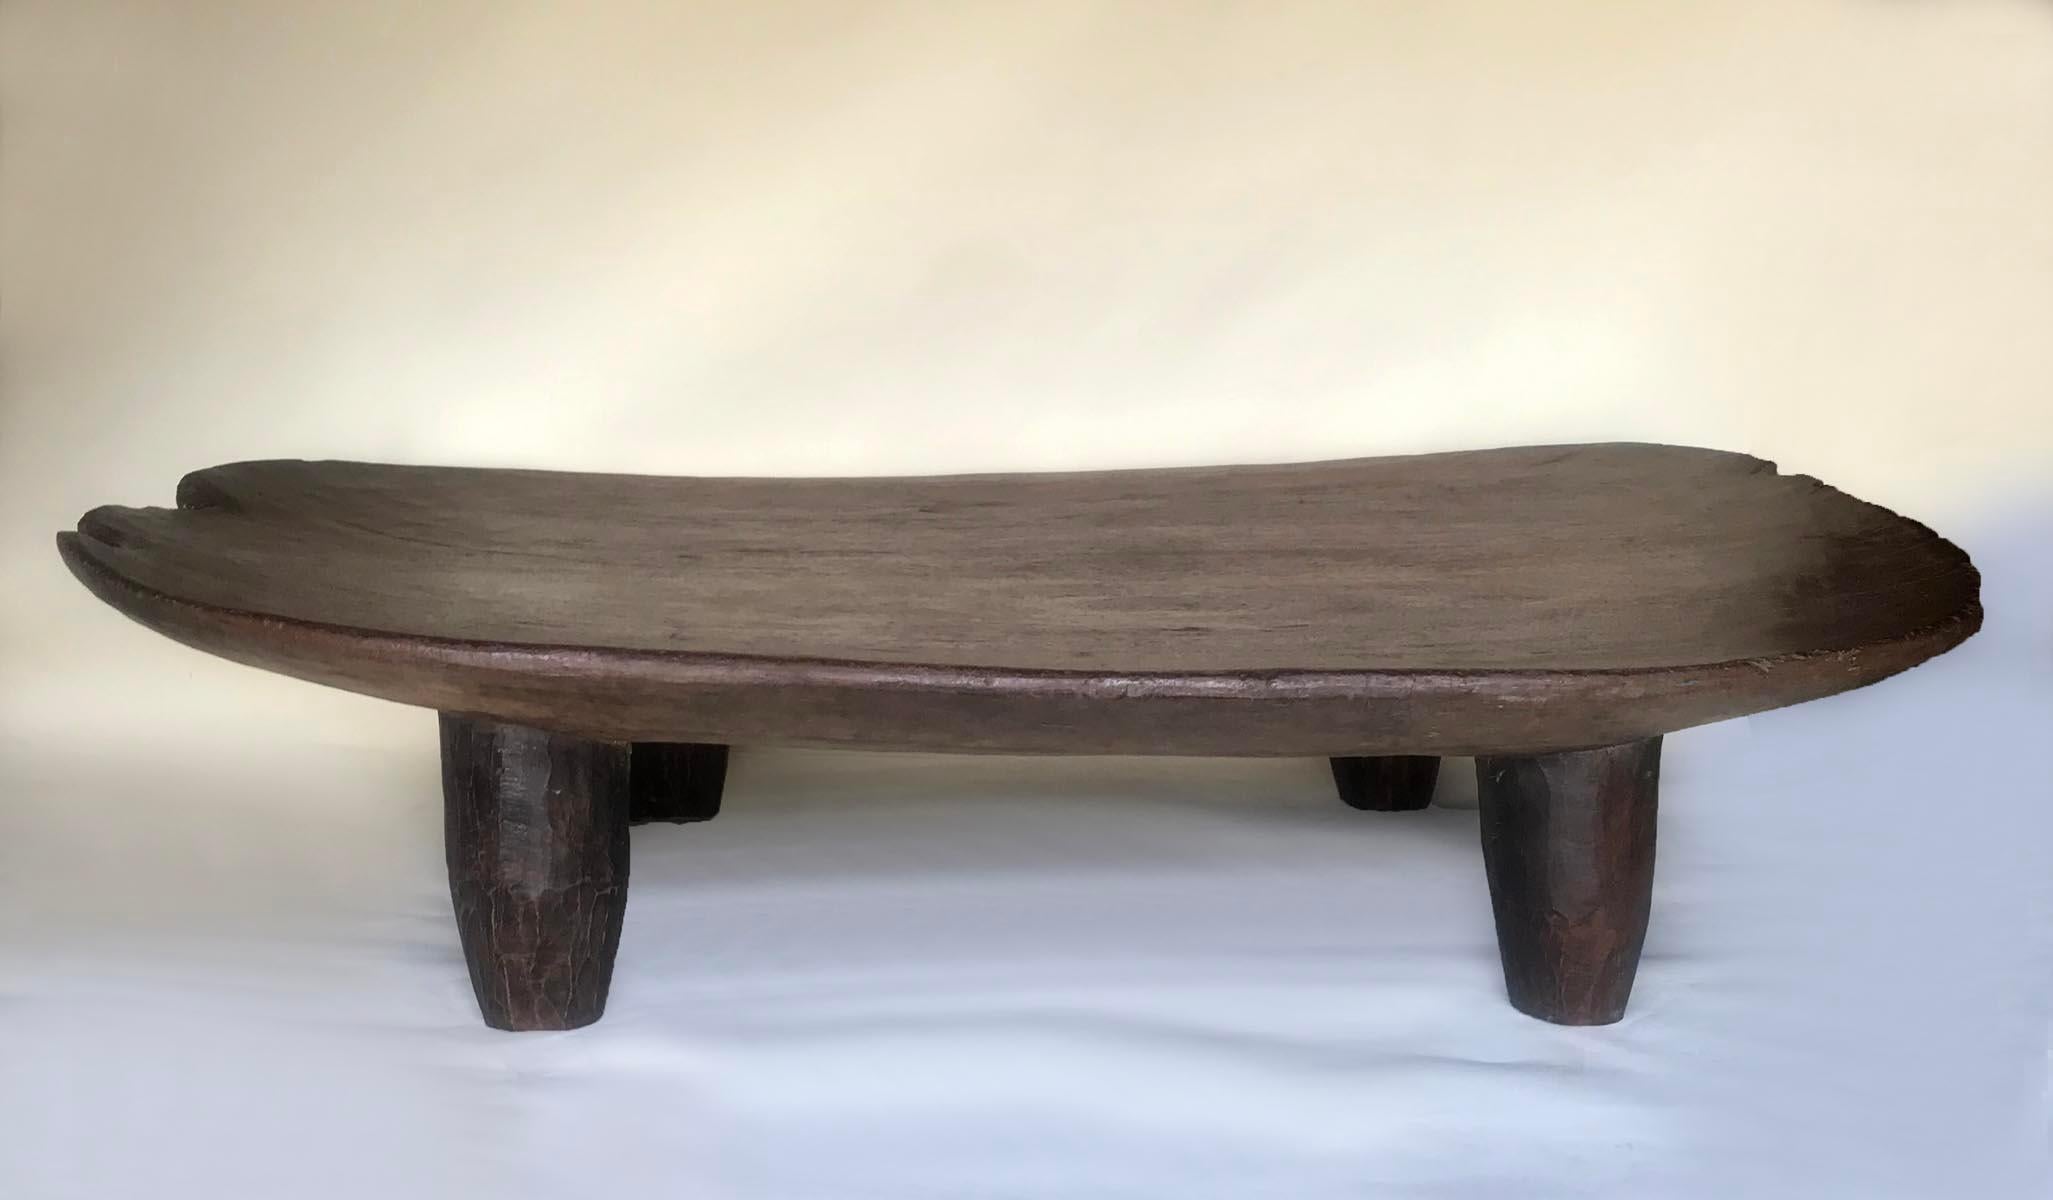 Huge! Carved out of one very wide single piece of wood, this is a vintage bed from the Nupe tribe in northern Nigeria. Wonderful old patina throughout. Carved conical legs. This table would be a fantastic coffee table. Beautiful wood, smooth and